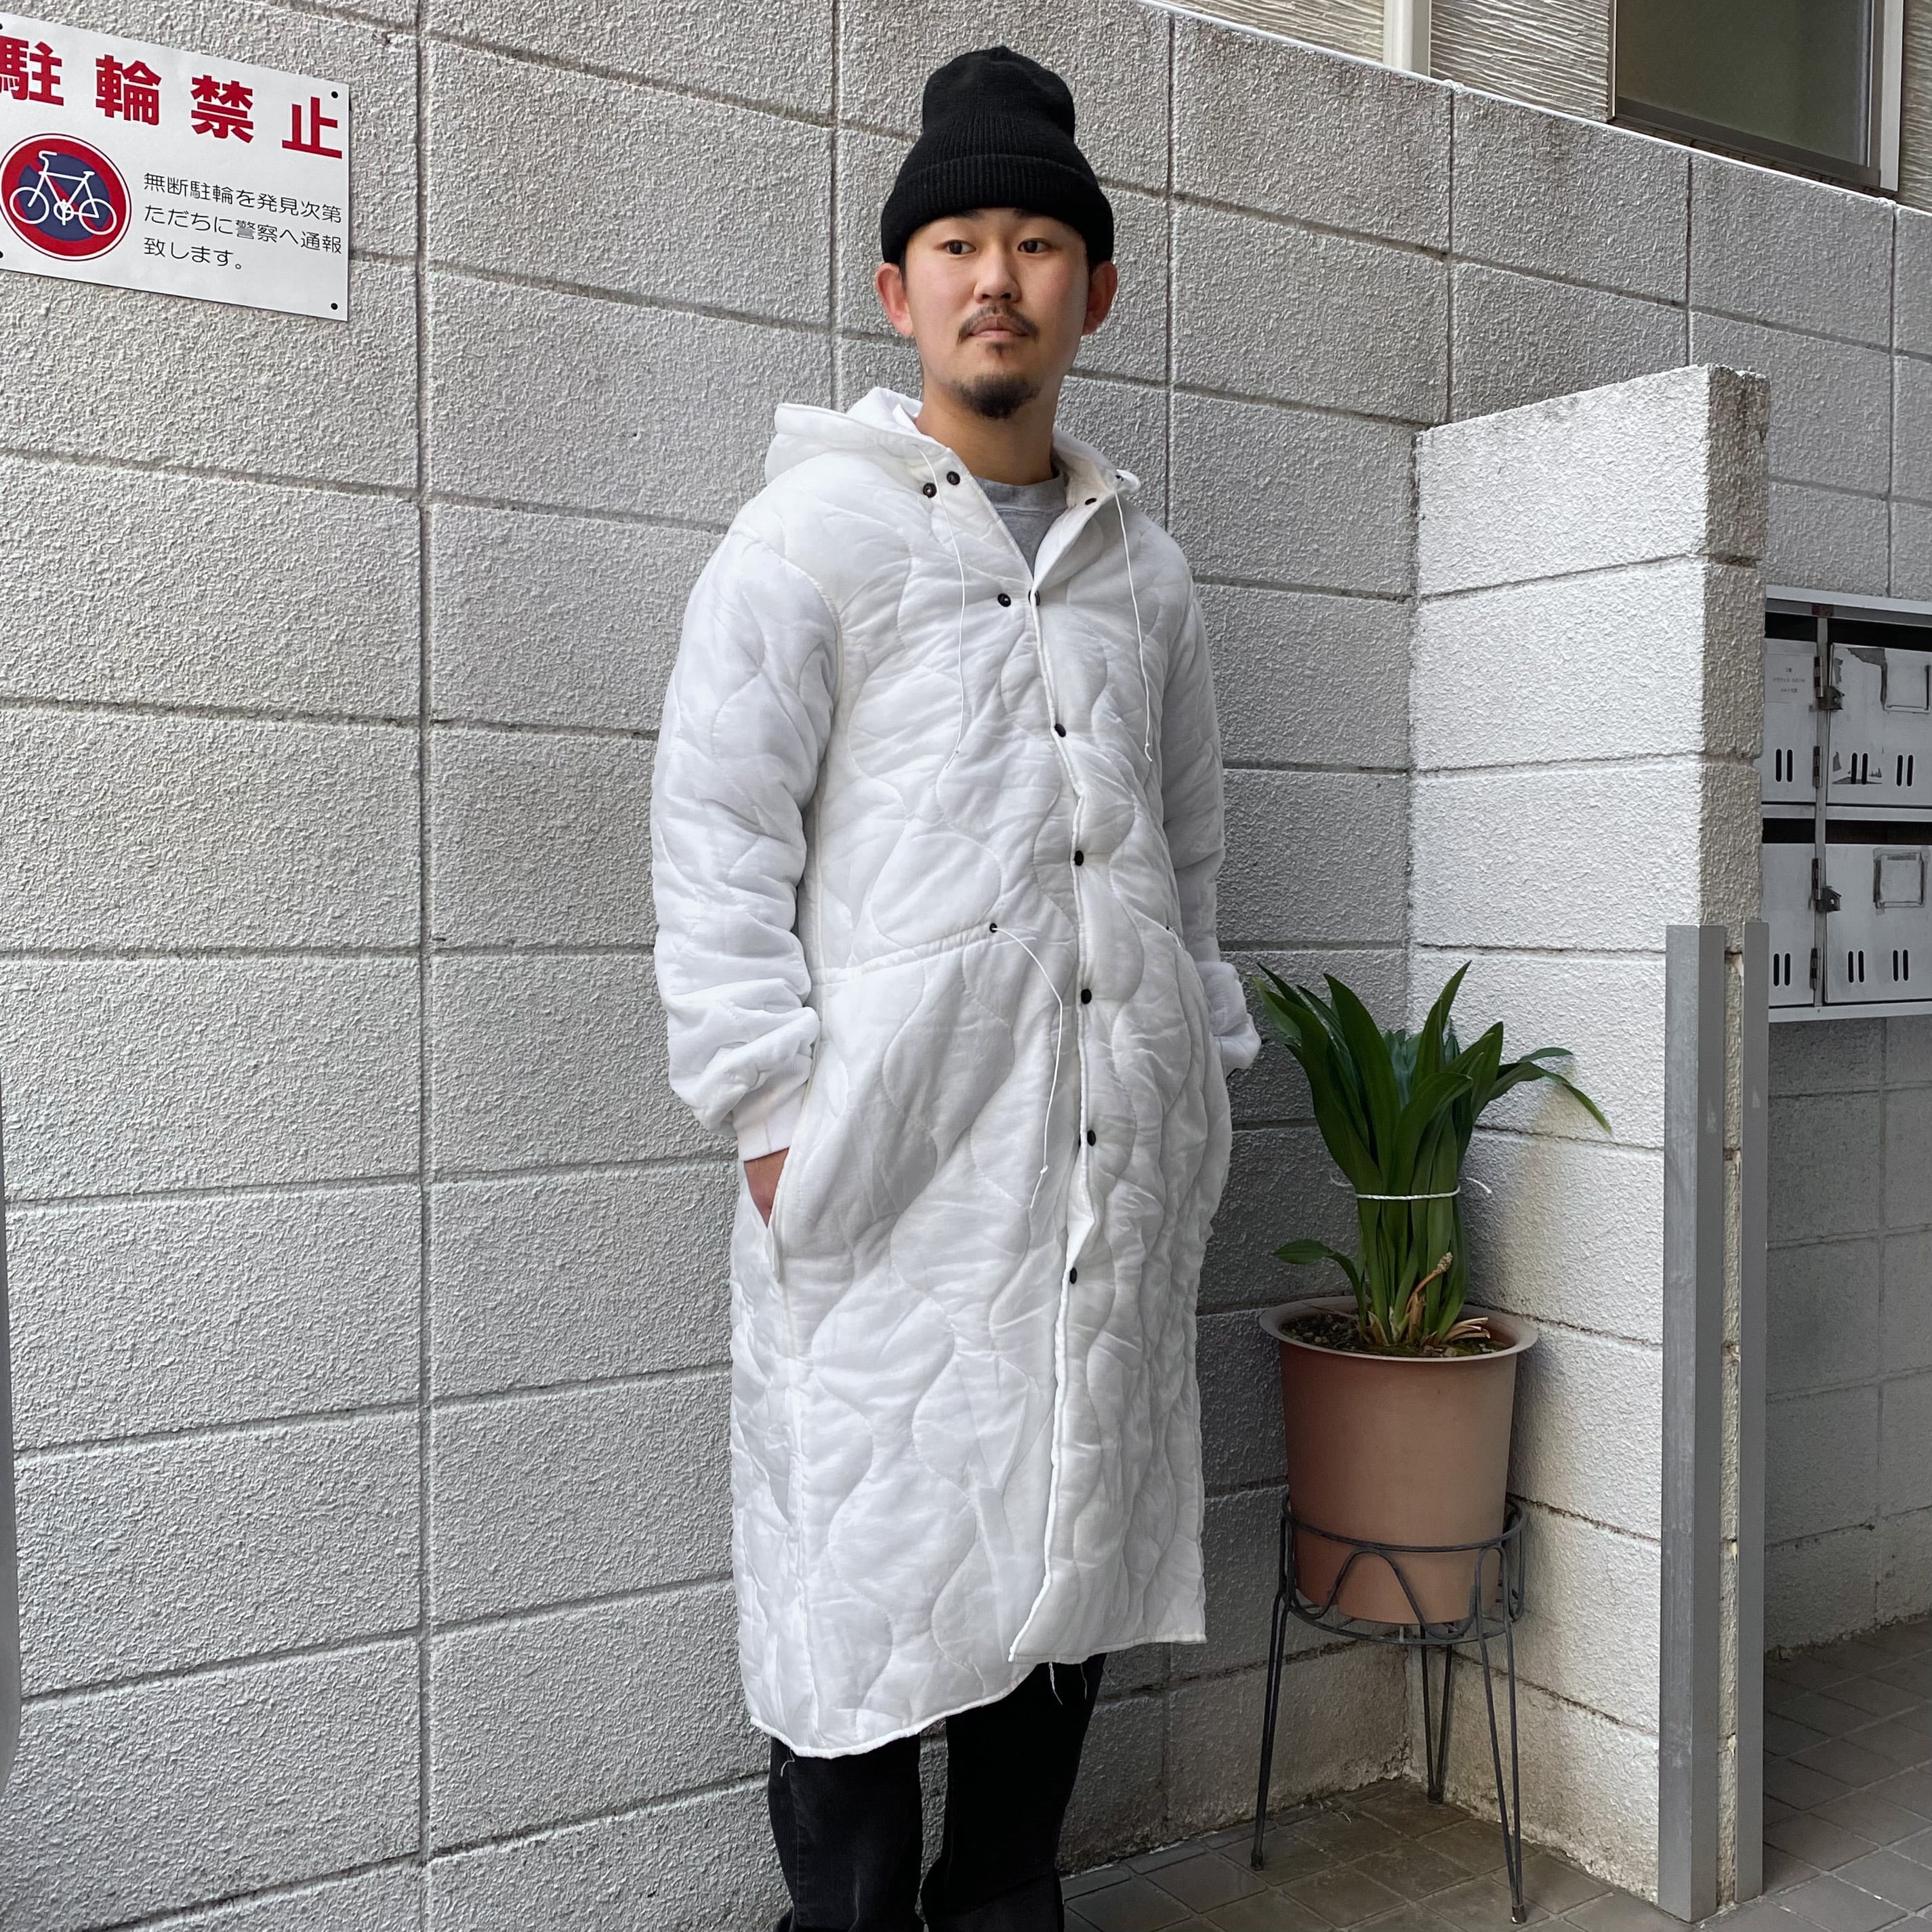 DEADSTOCK 80's US Army Food Inspector's Smock Quilting Liner S / 米軍  フードインスペクター スモック ライナー キルティング 白 ホワイト 古着 ヴィンテージ